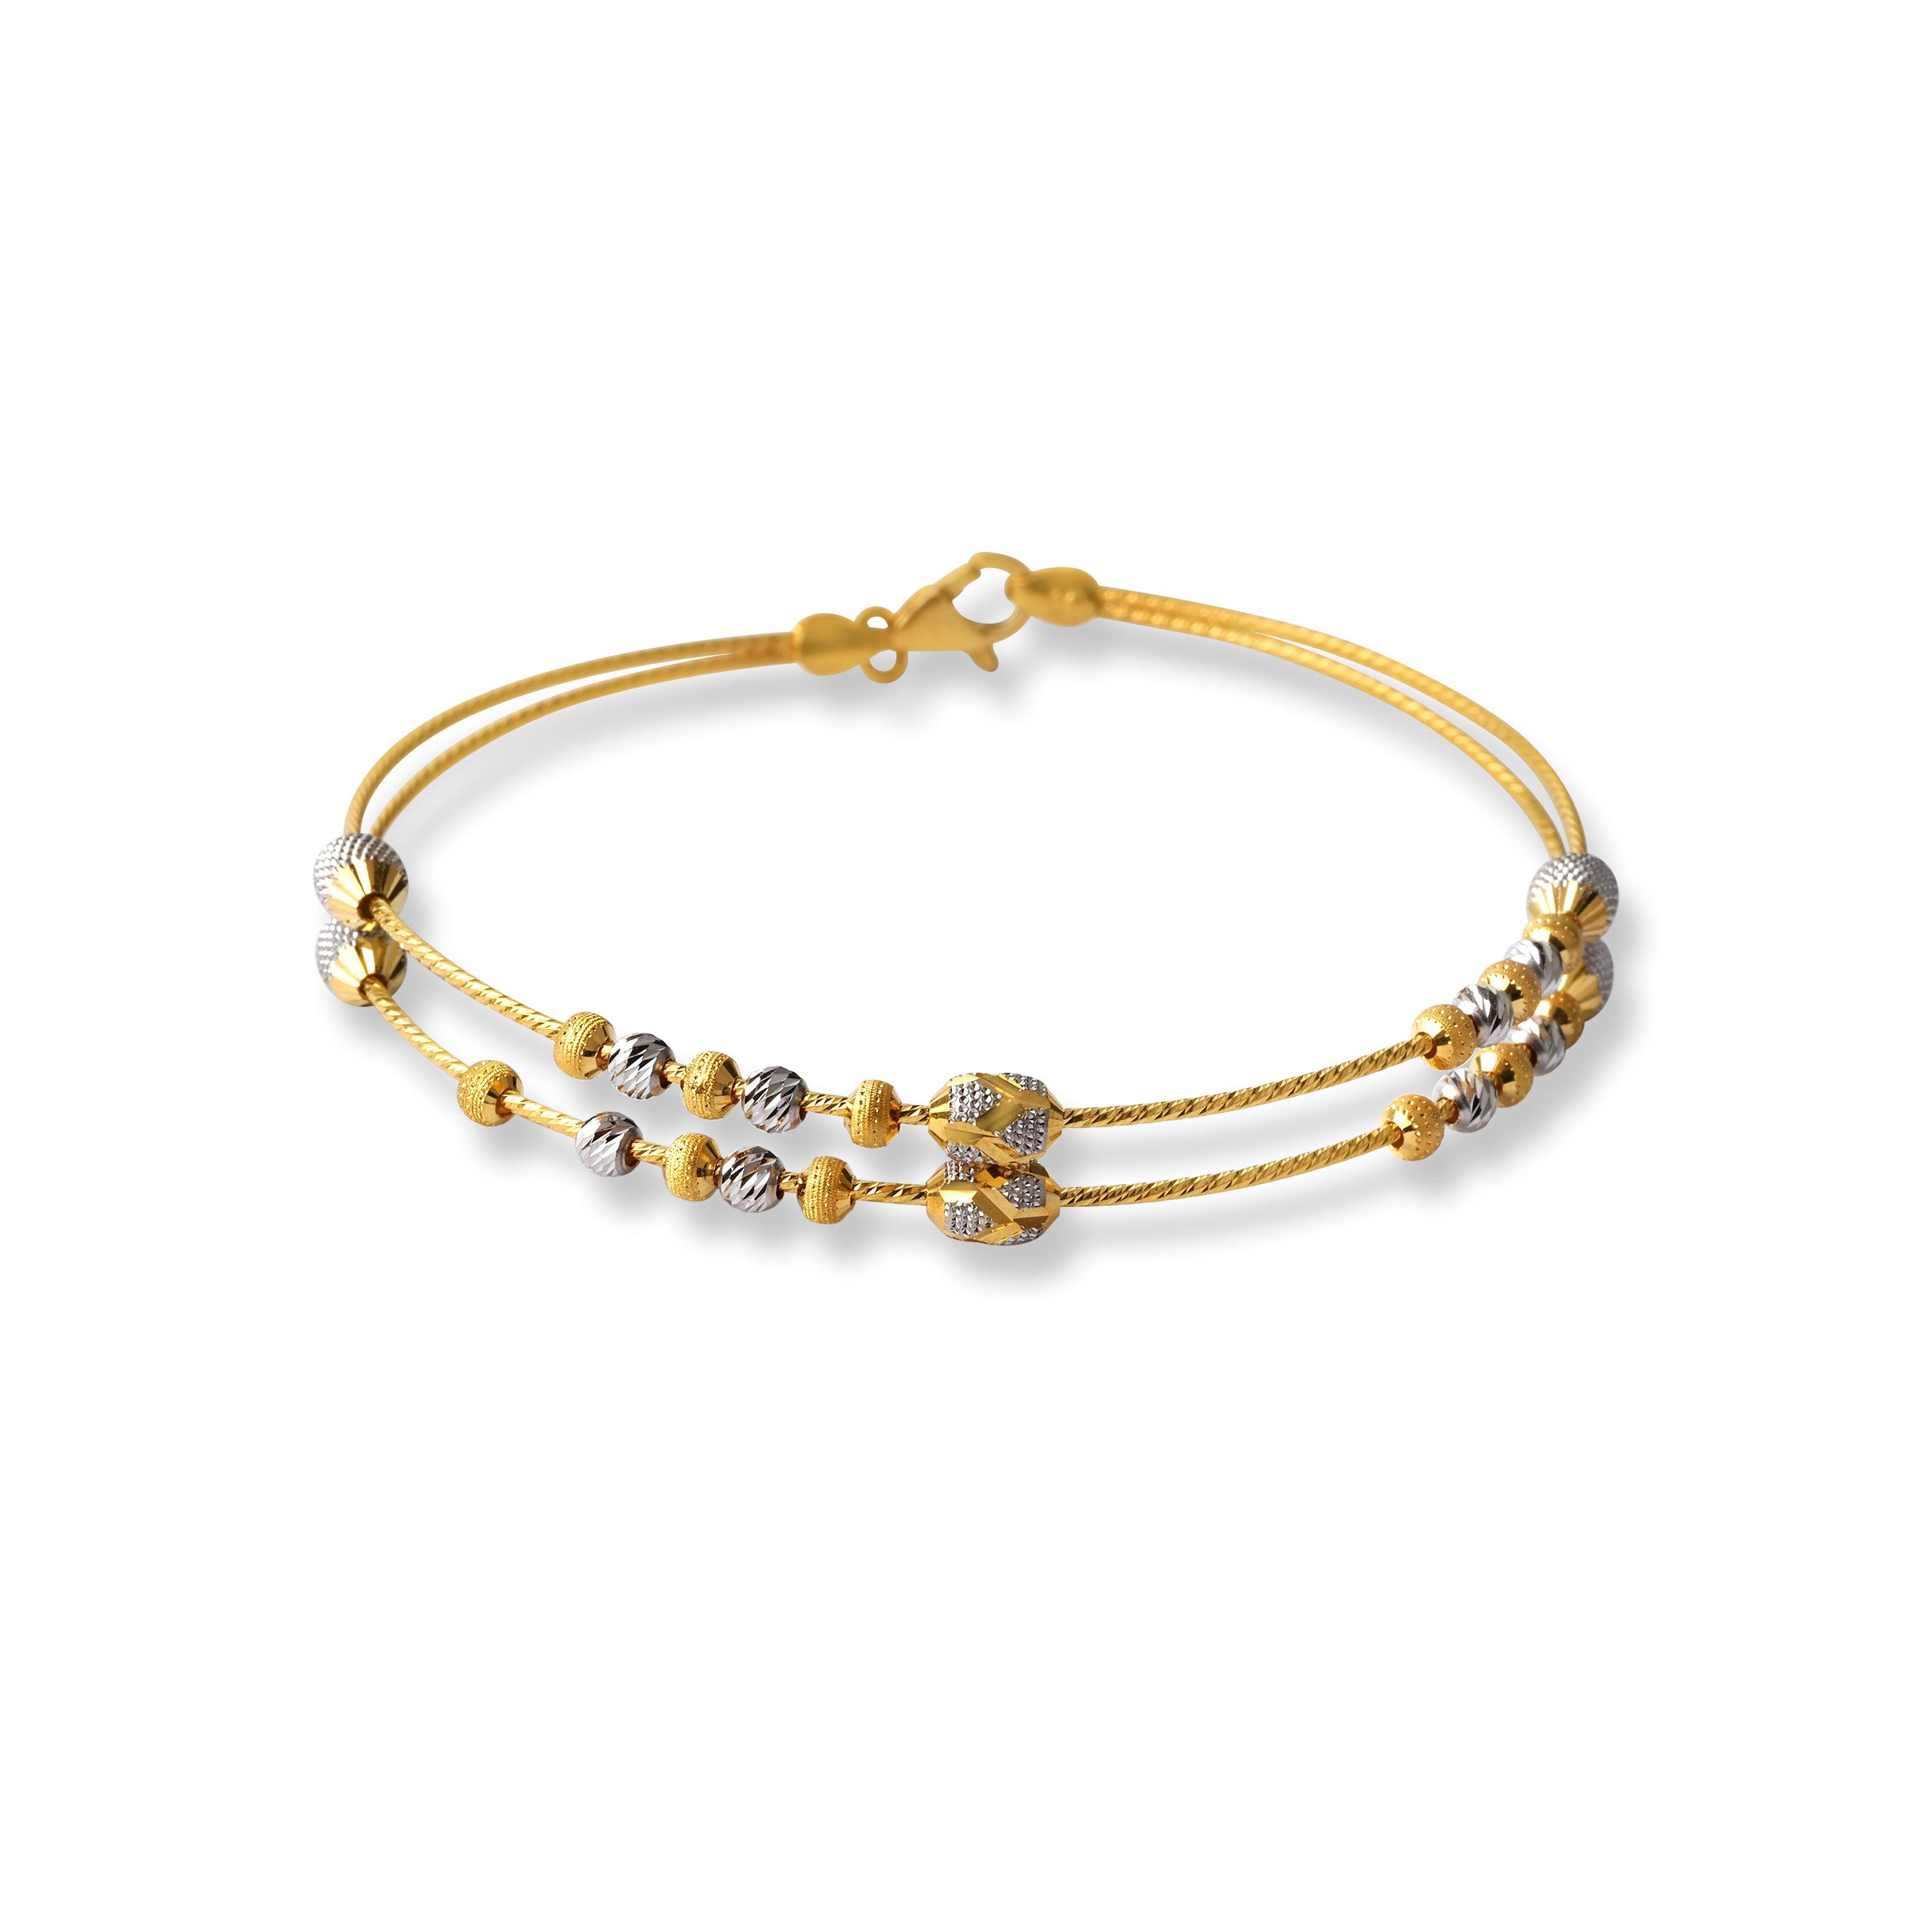 22ct Gold Rhodium Plated Beads Bangle With Rounded Trigger Clasp (8.64g) B-8446 - Minar Jewellers